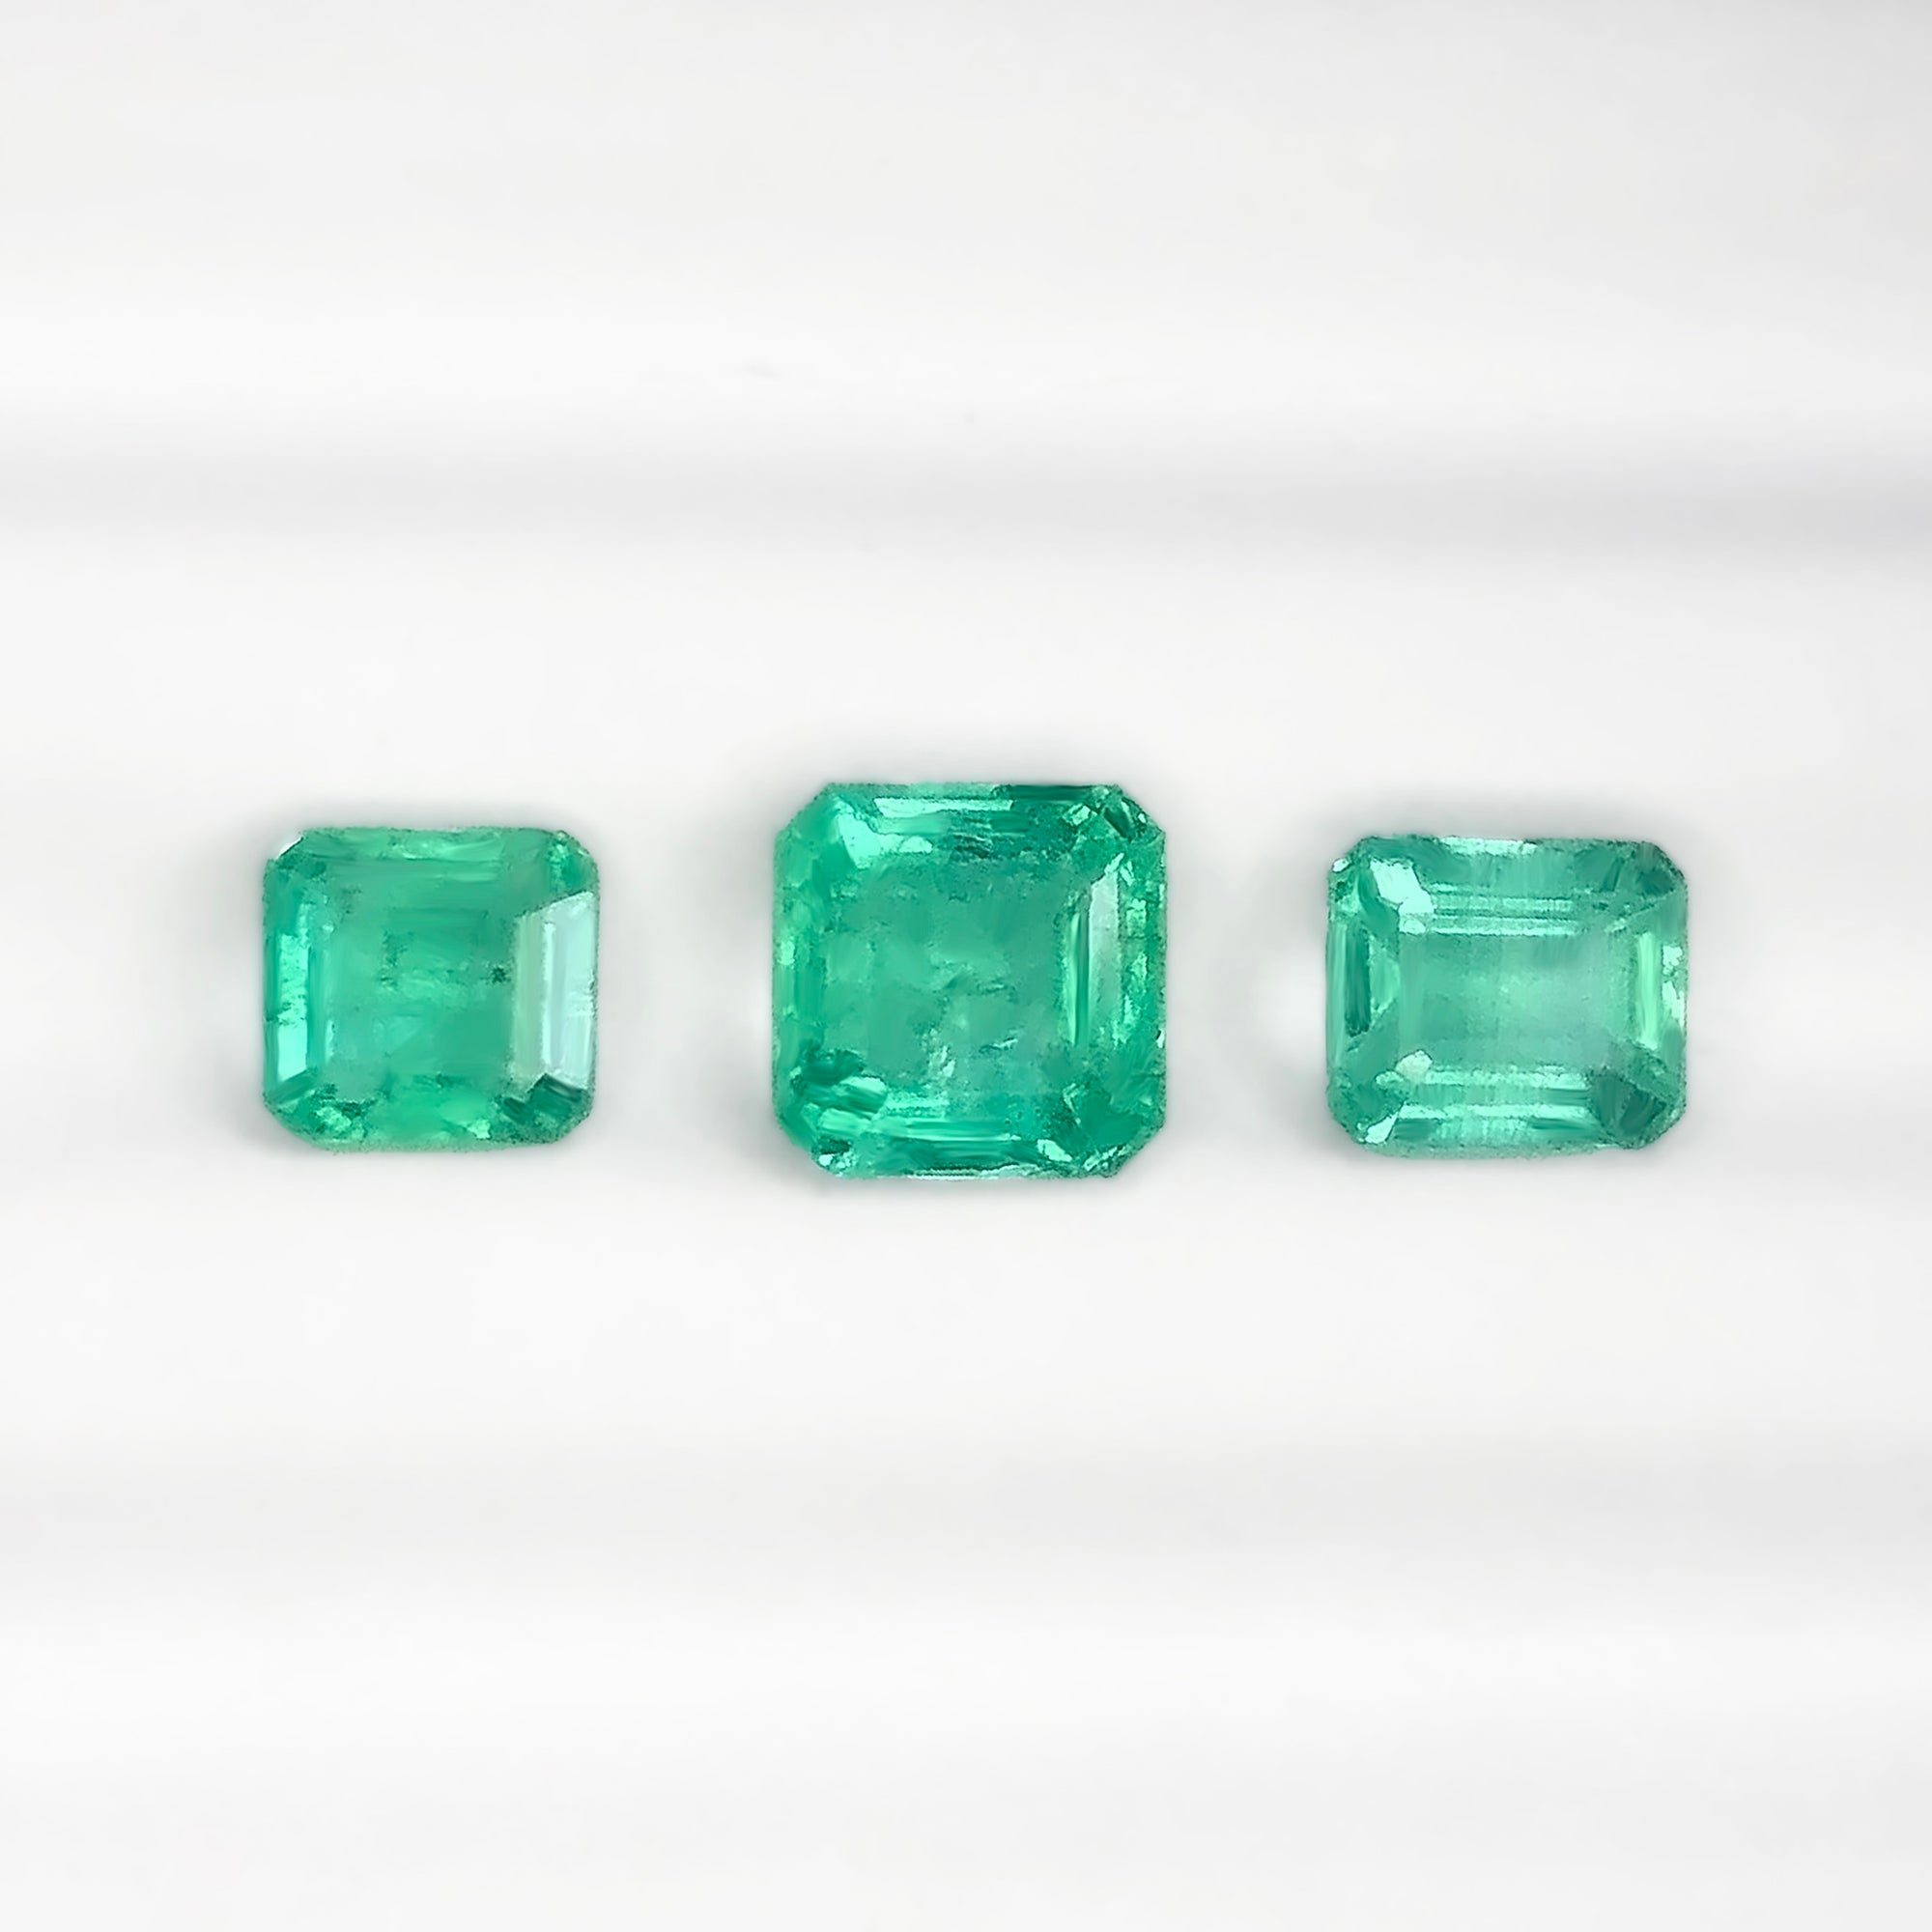 African Emerald Square Octagonal Step Cut 1.23-2.34CT G143 G144 G145